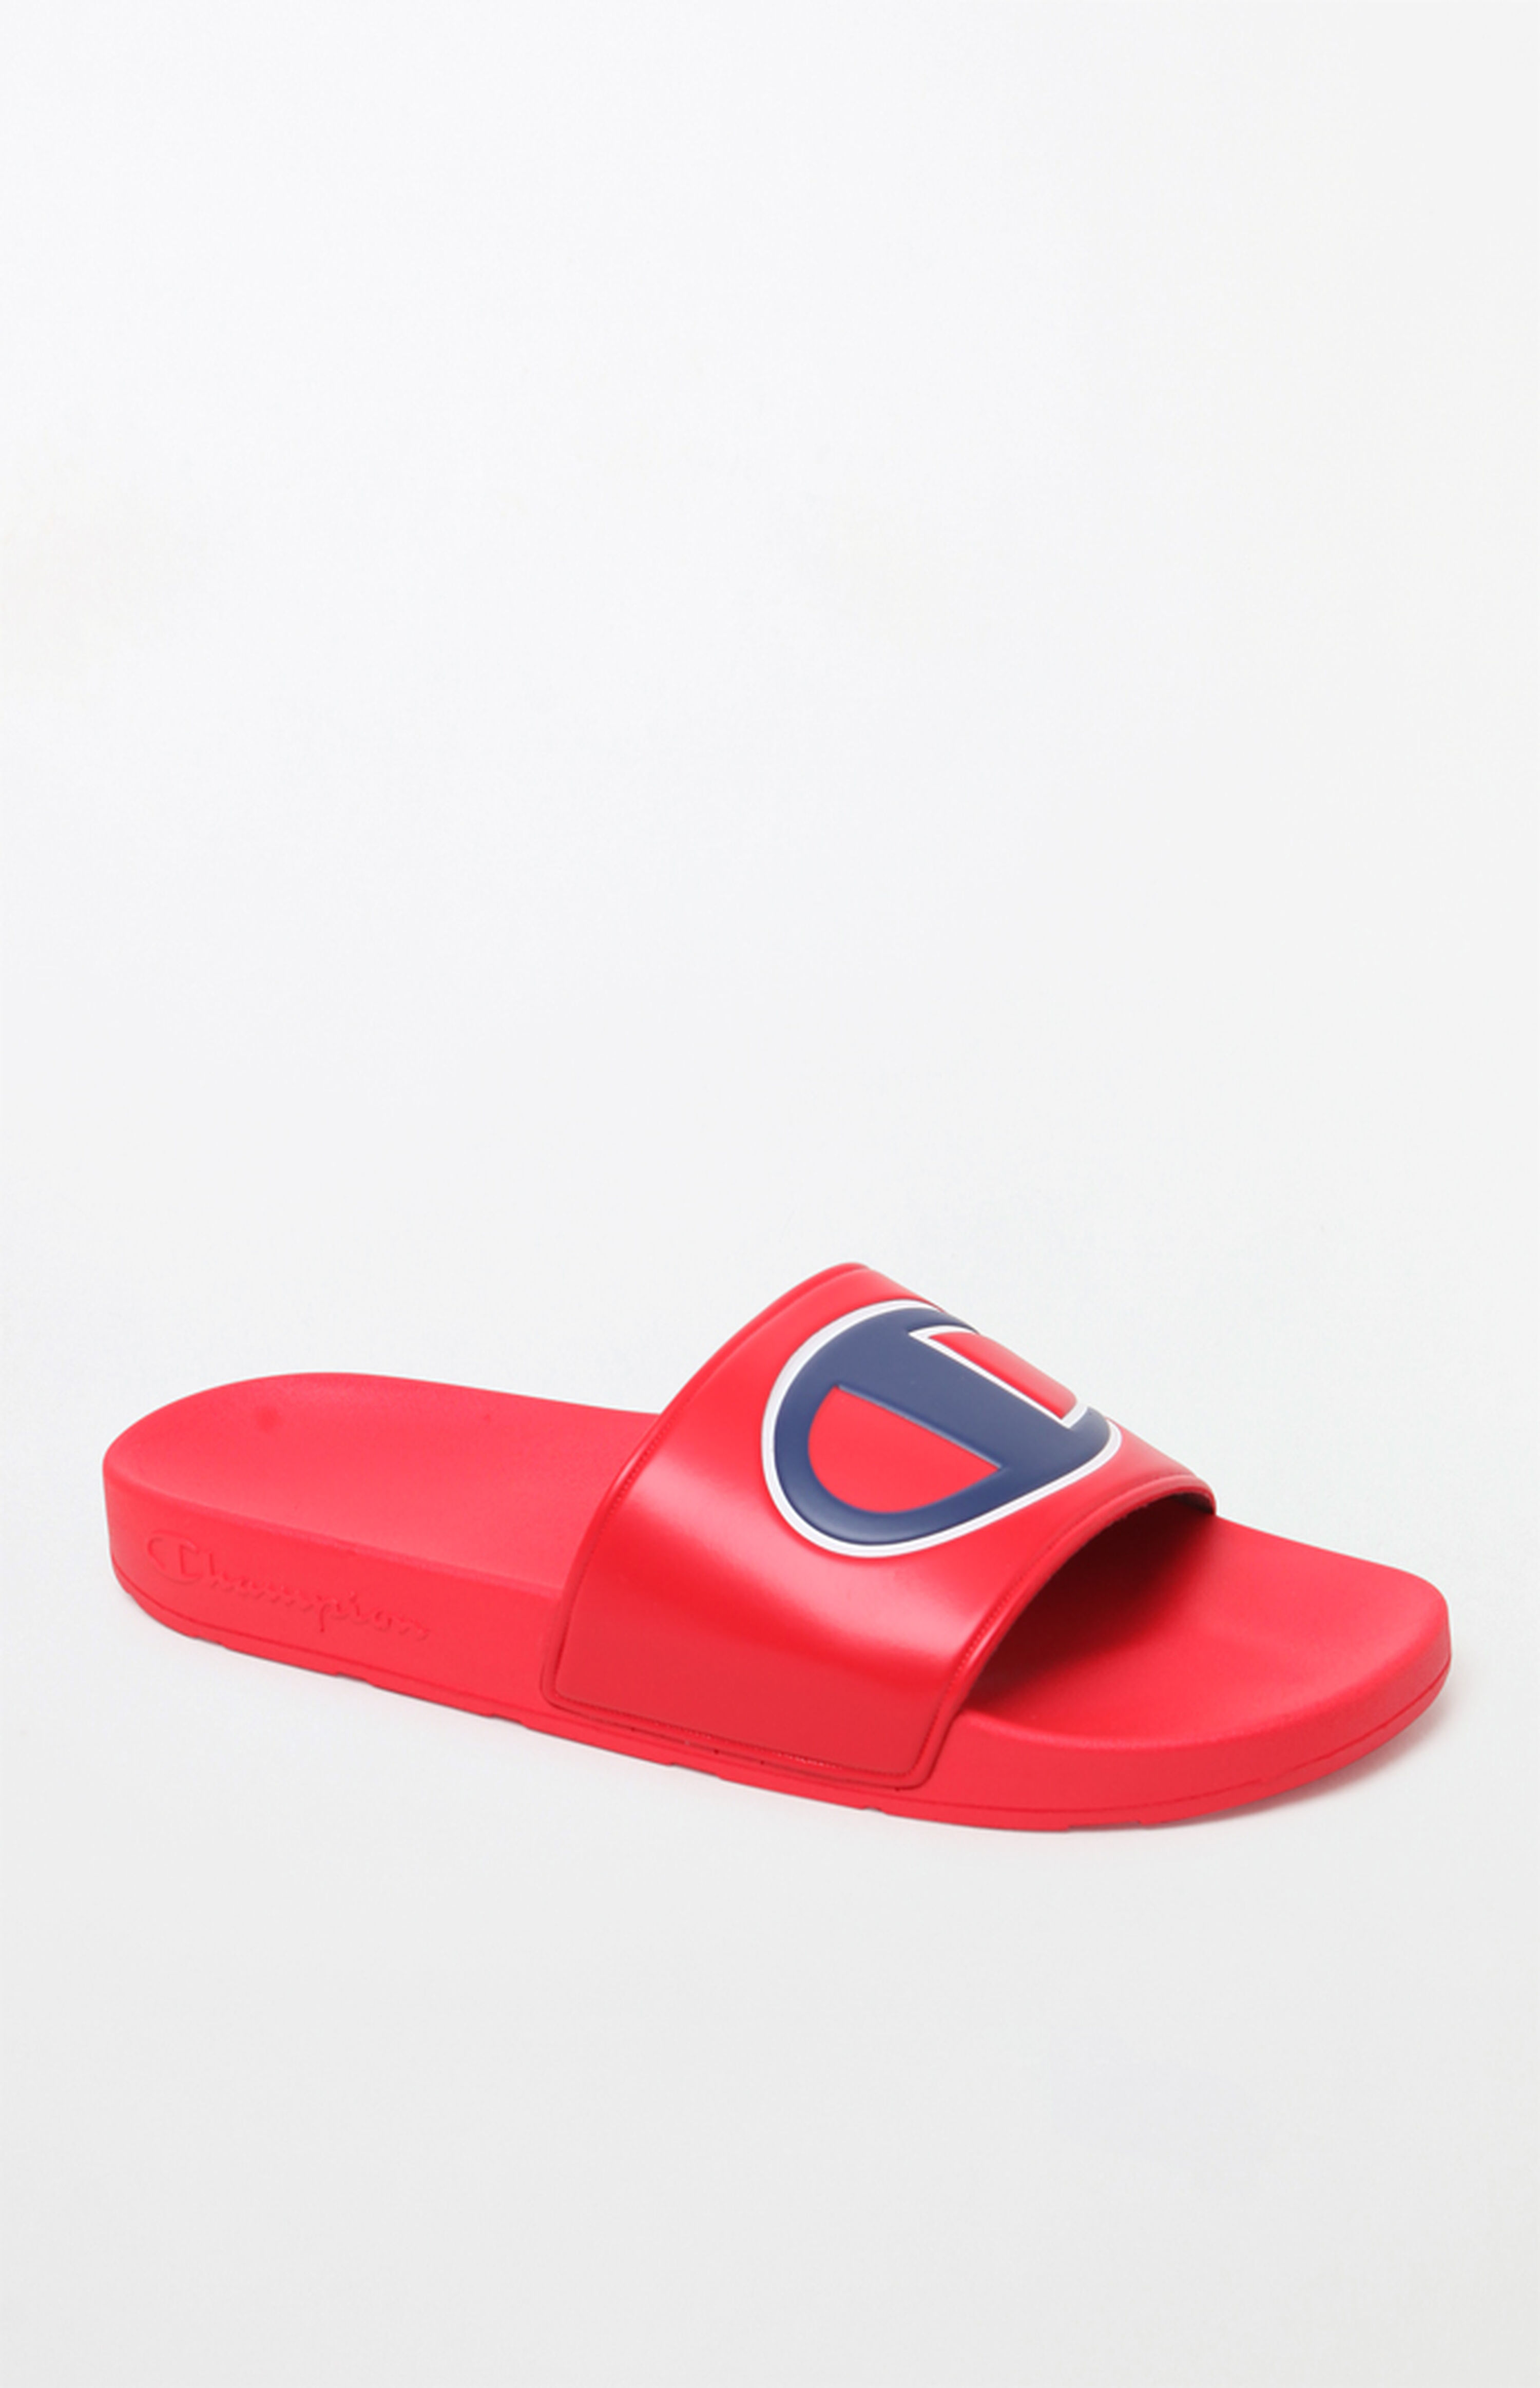 Champion Red IPO Slide Sandals | PacSun | PacSun